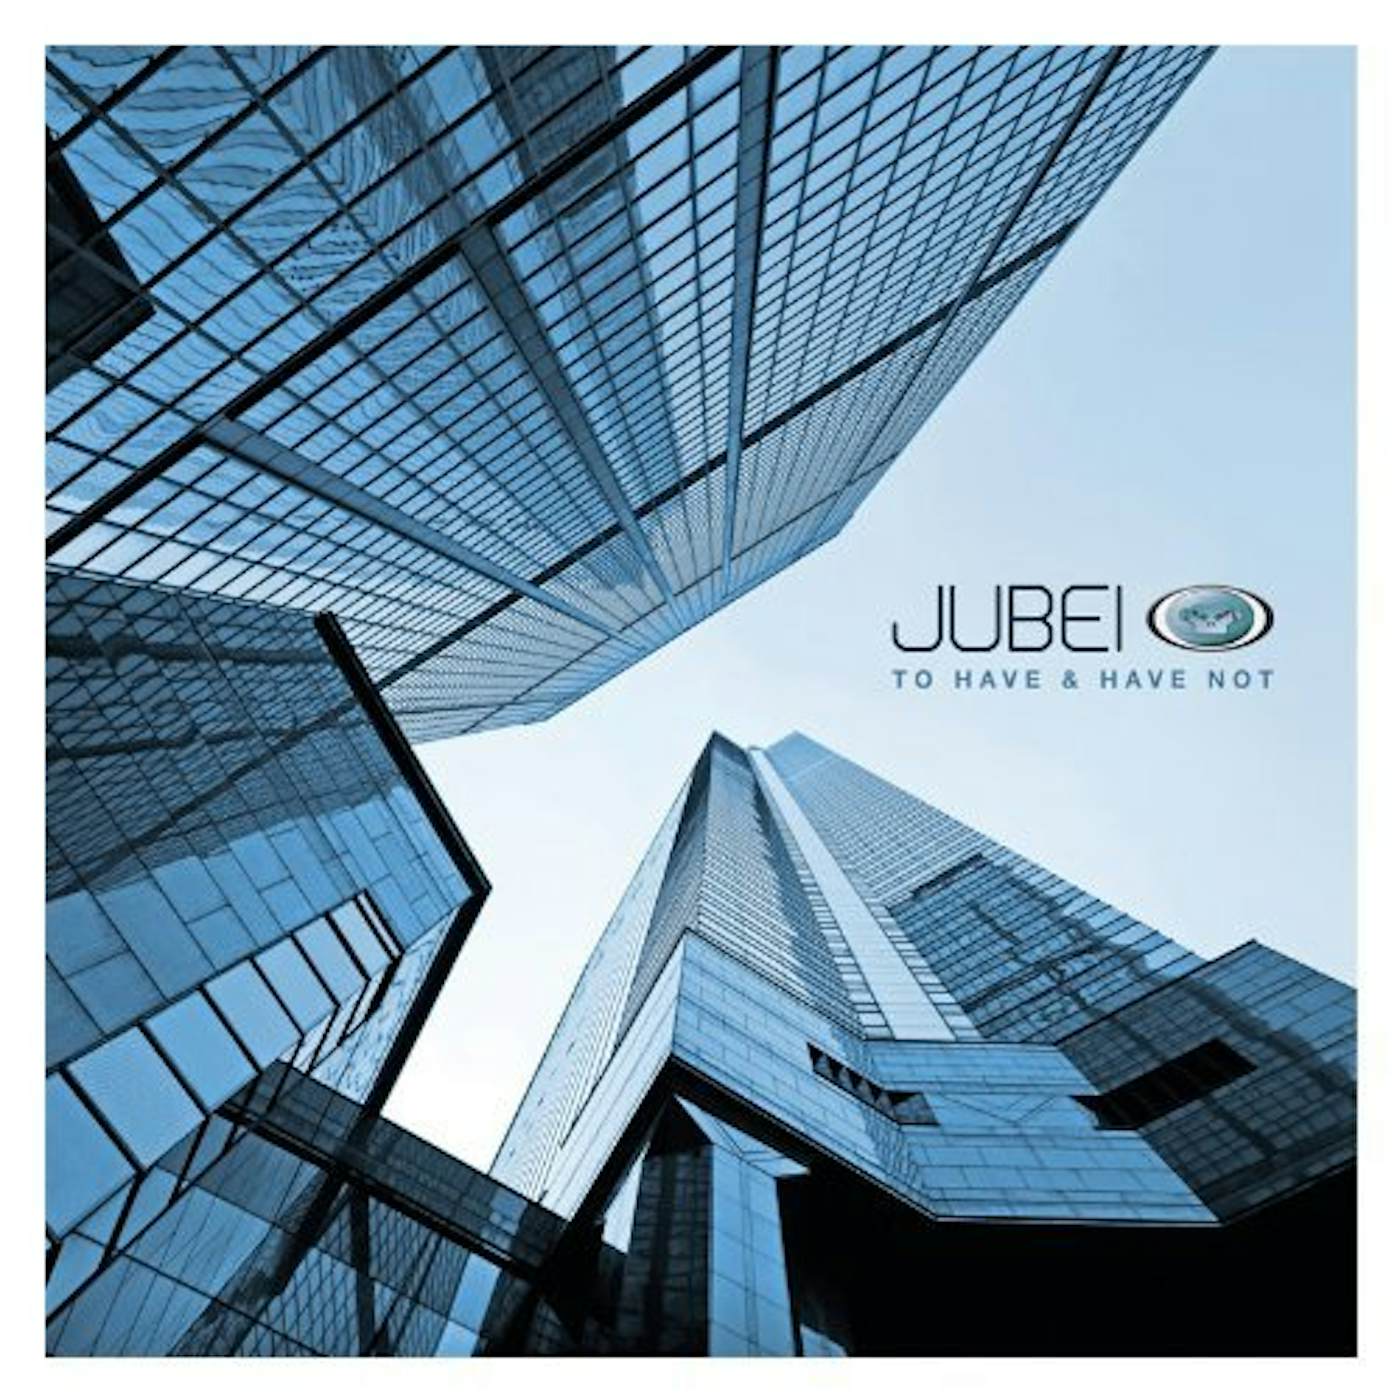 Jubei TO HAVE & HAVE NOT CD